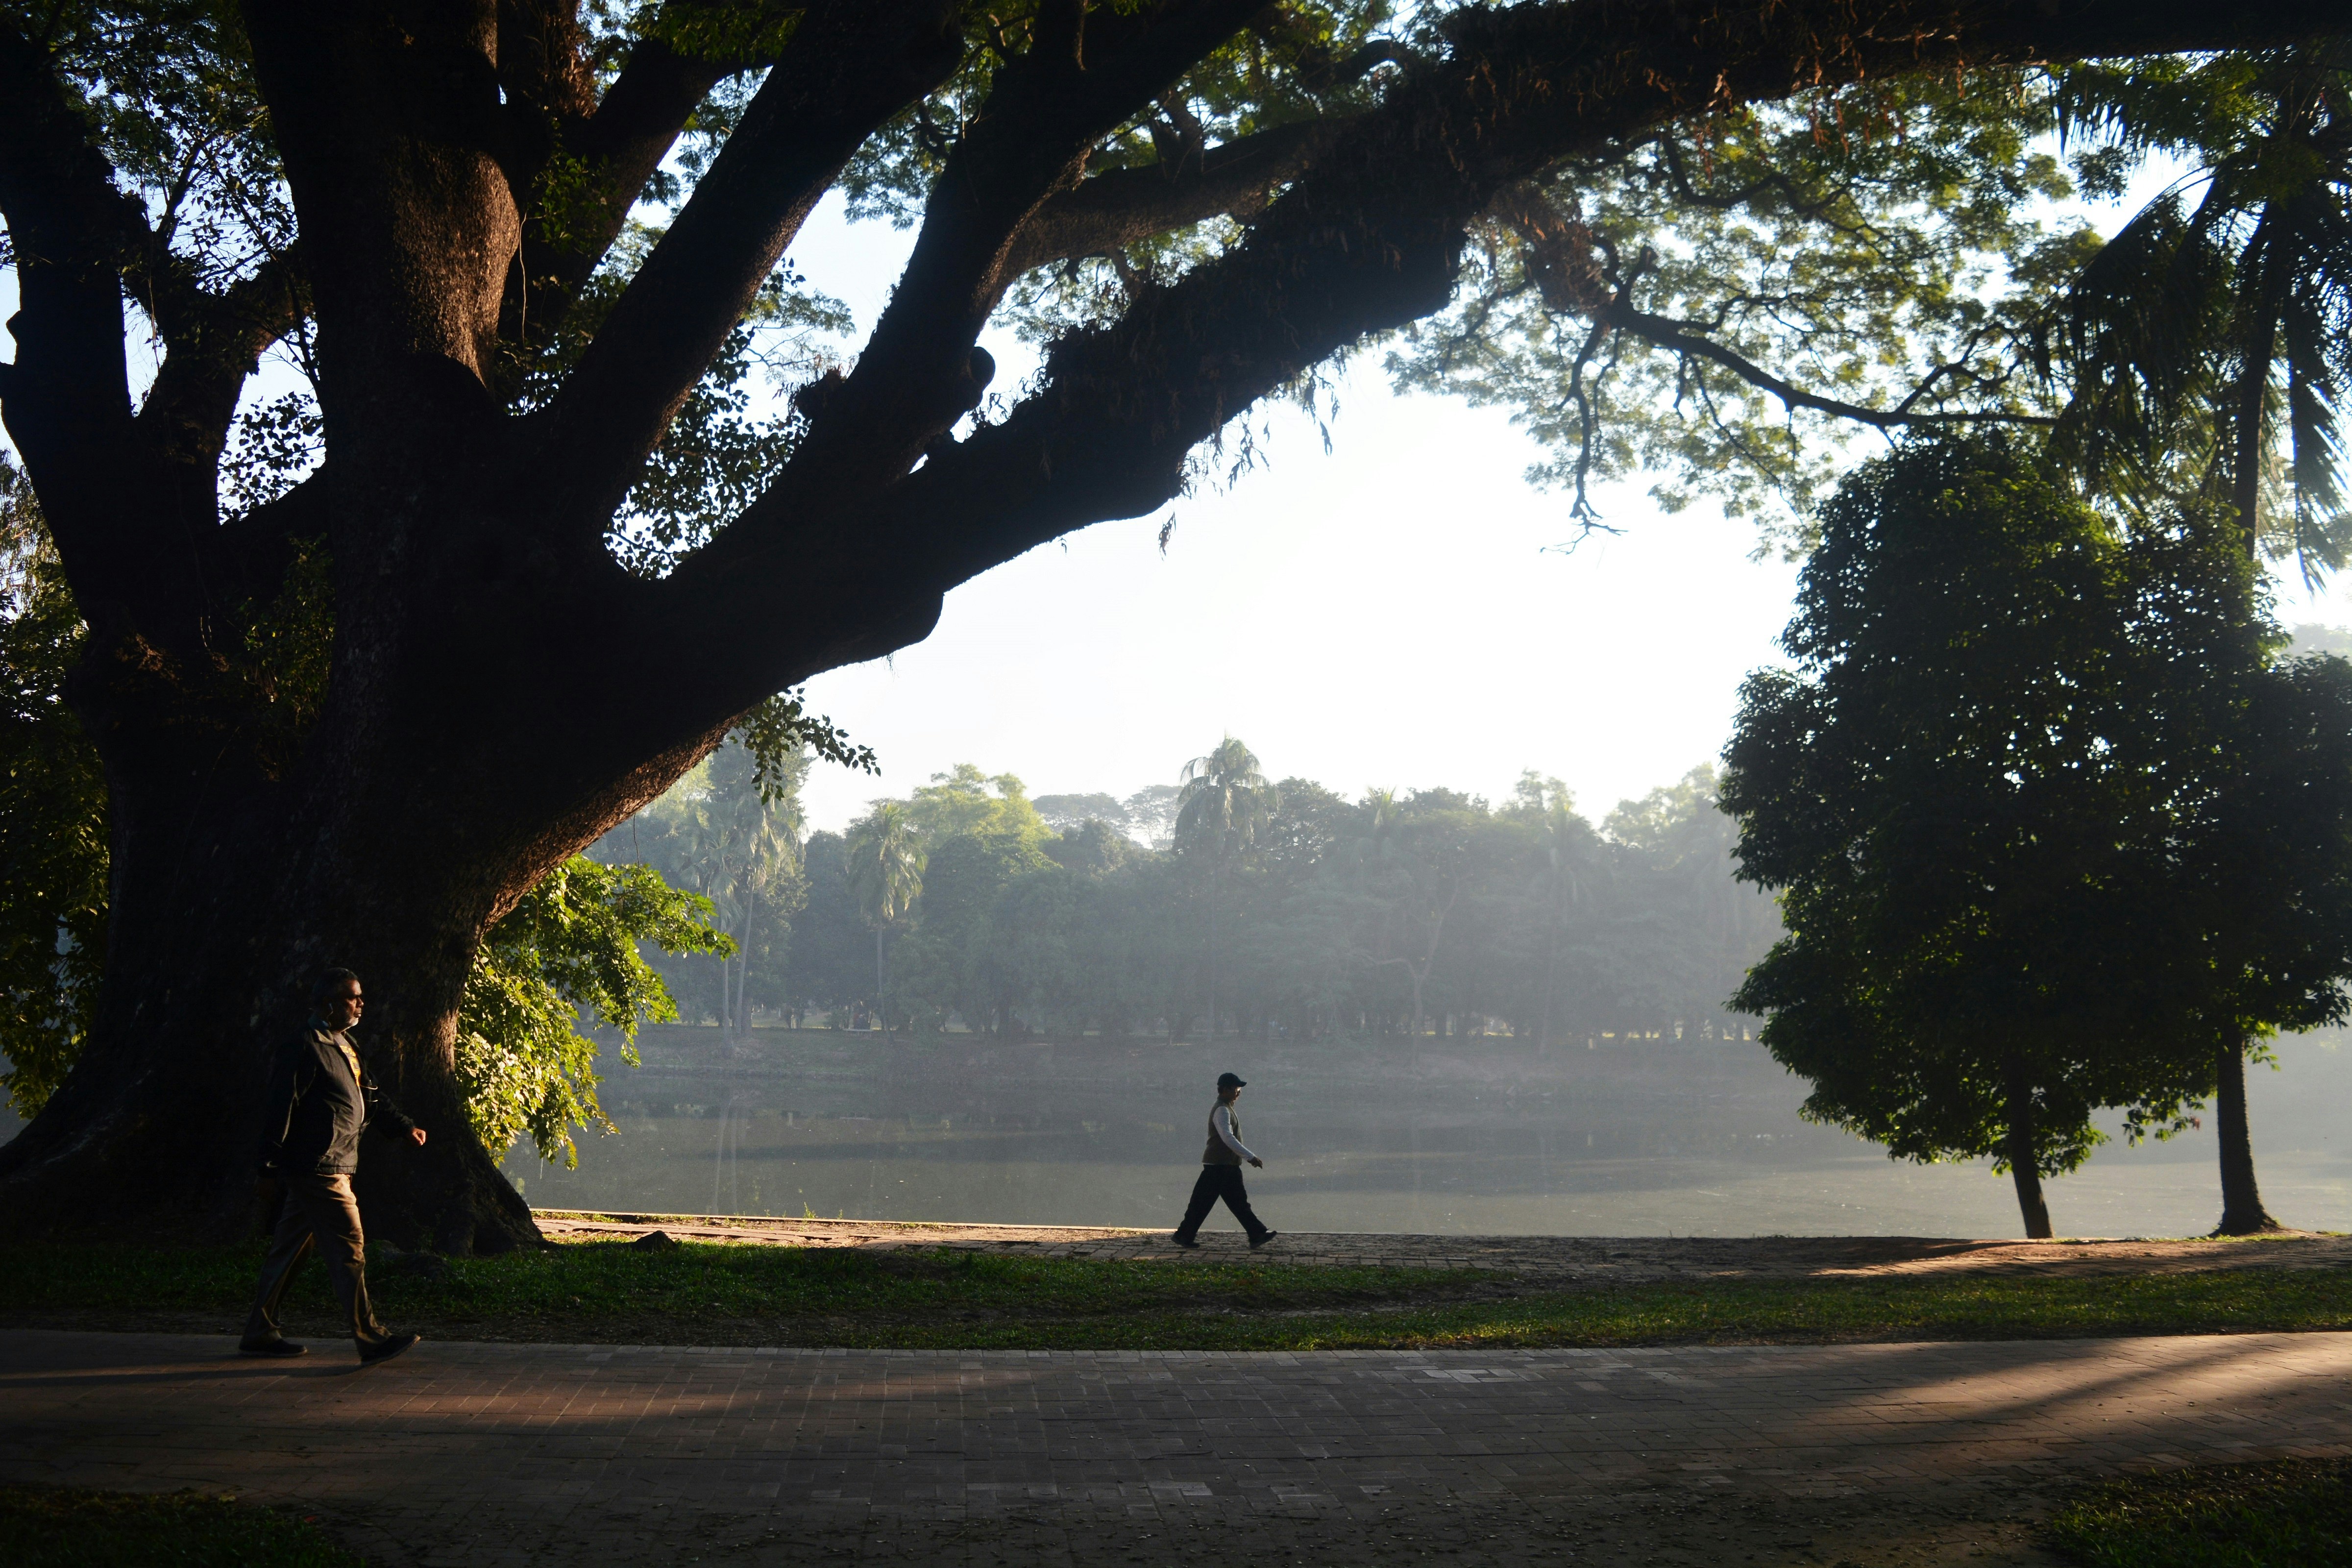 A lone figure walking on the grass in Ramna Park in Dhaka. It is early morning and some of the park is still dark. In front of the figure is a large tree, while behind, a lake is visible.